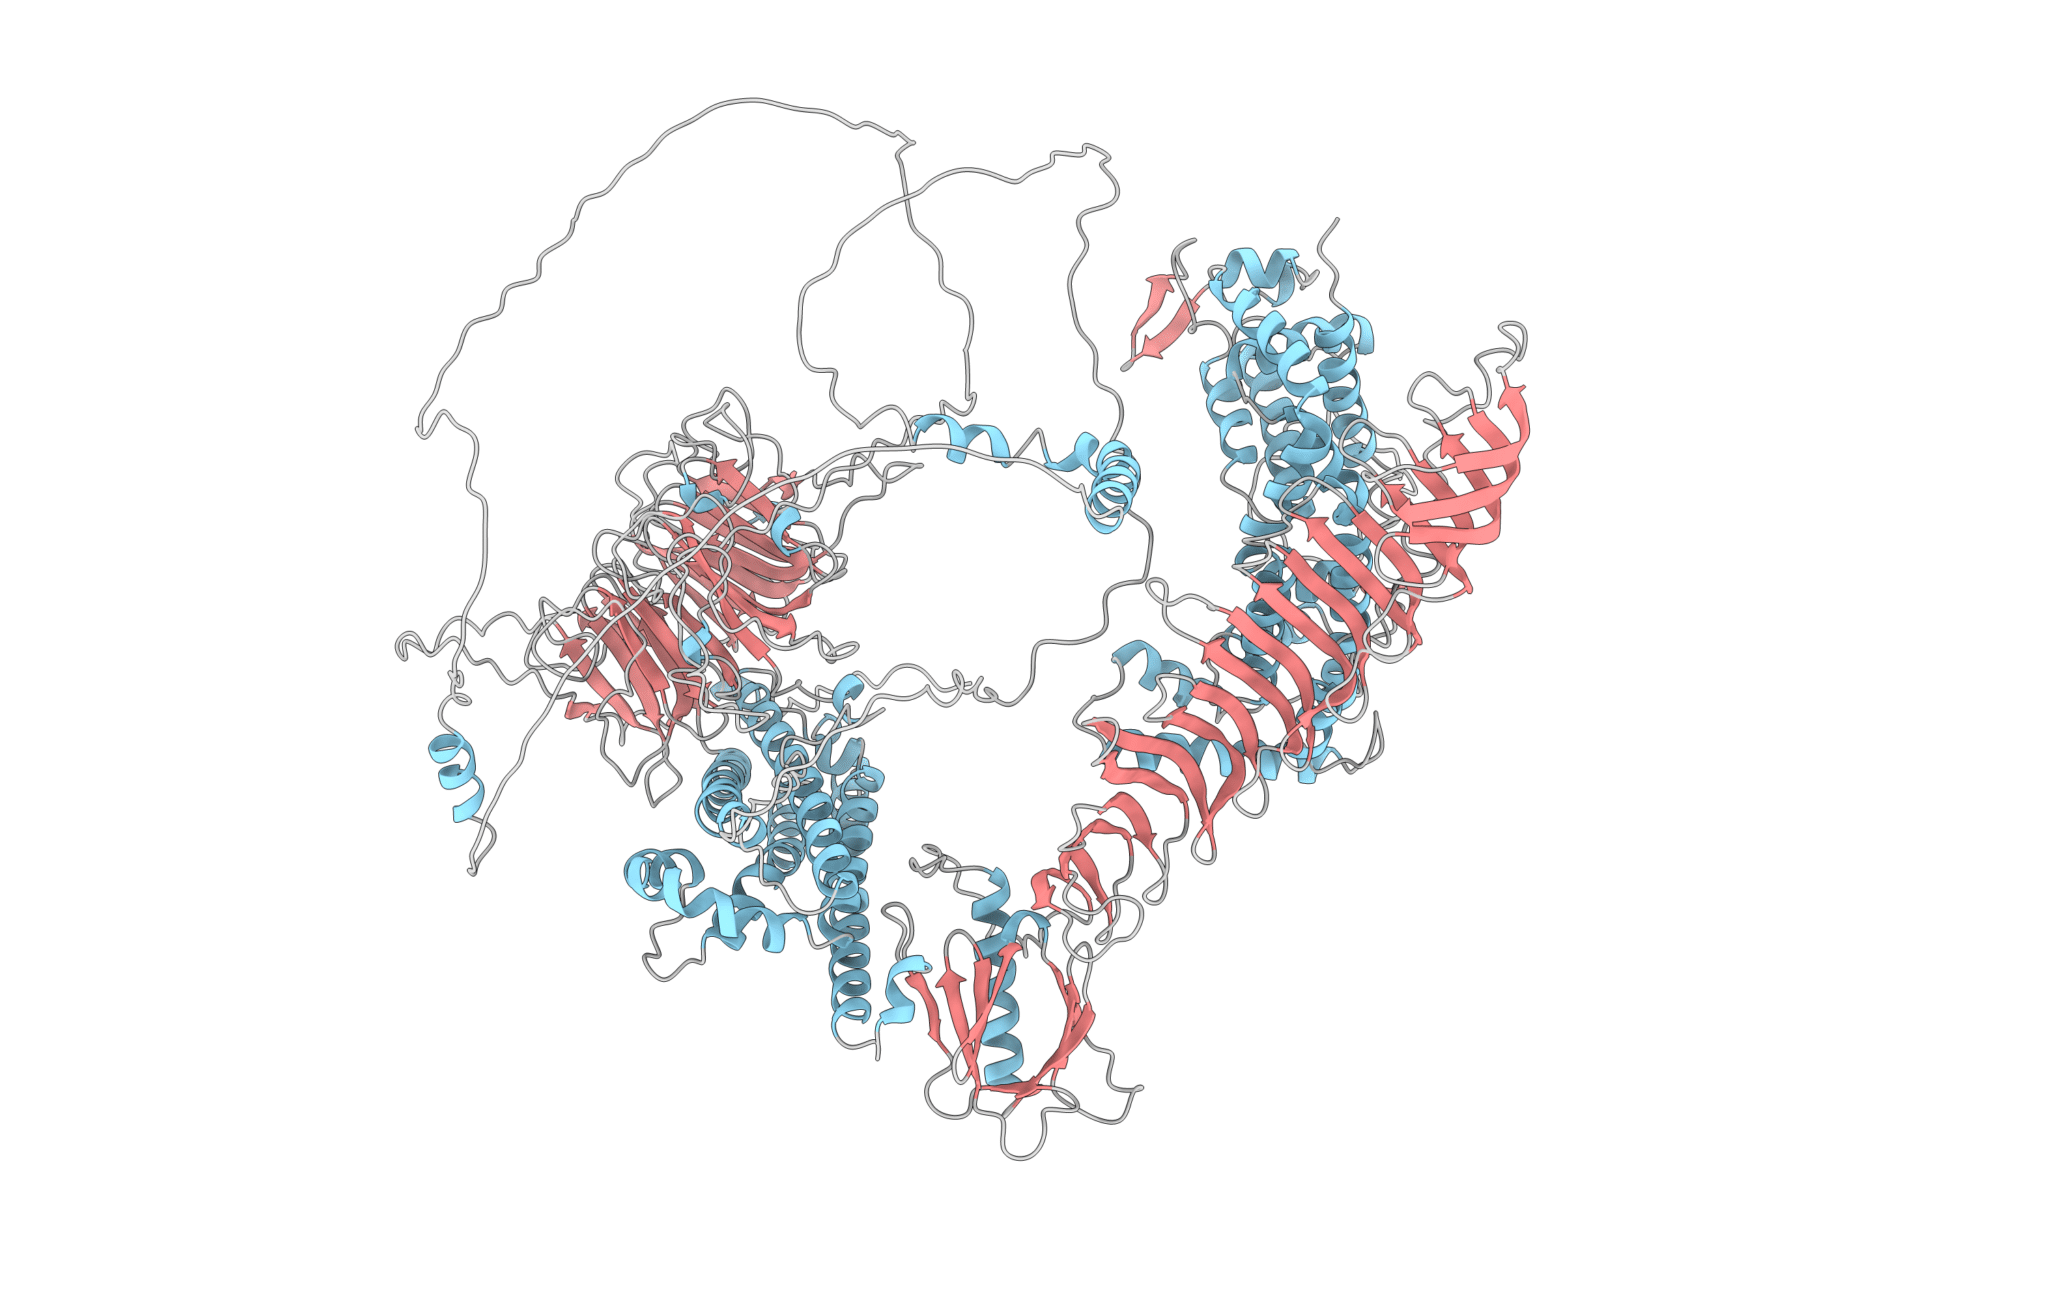 Predicted structure of the monomeric ALS2 protein.